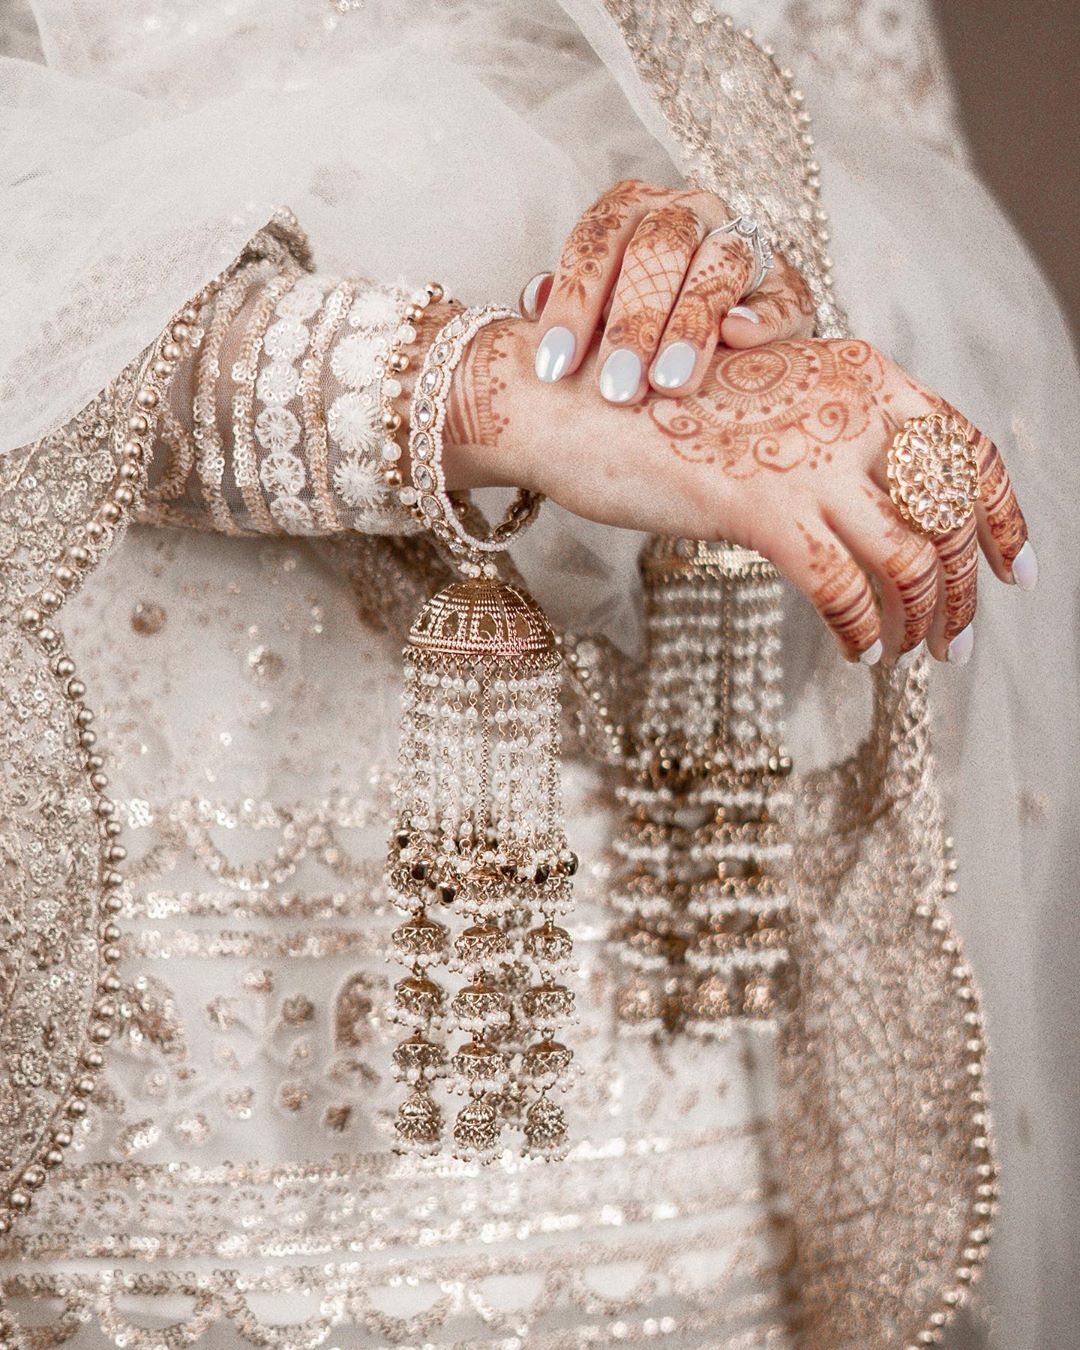 Decoding Bridal Trends in India: The Traditional Kaleera